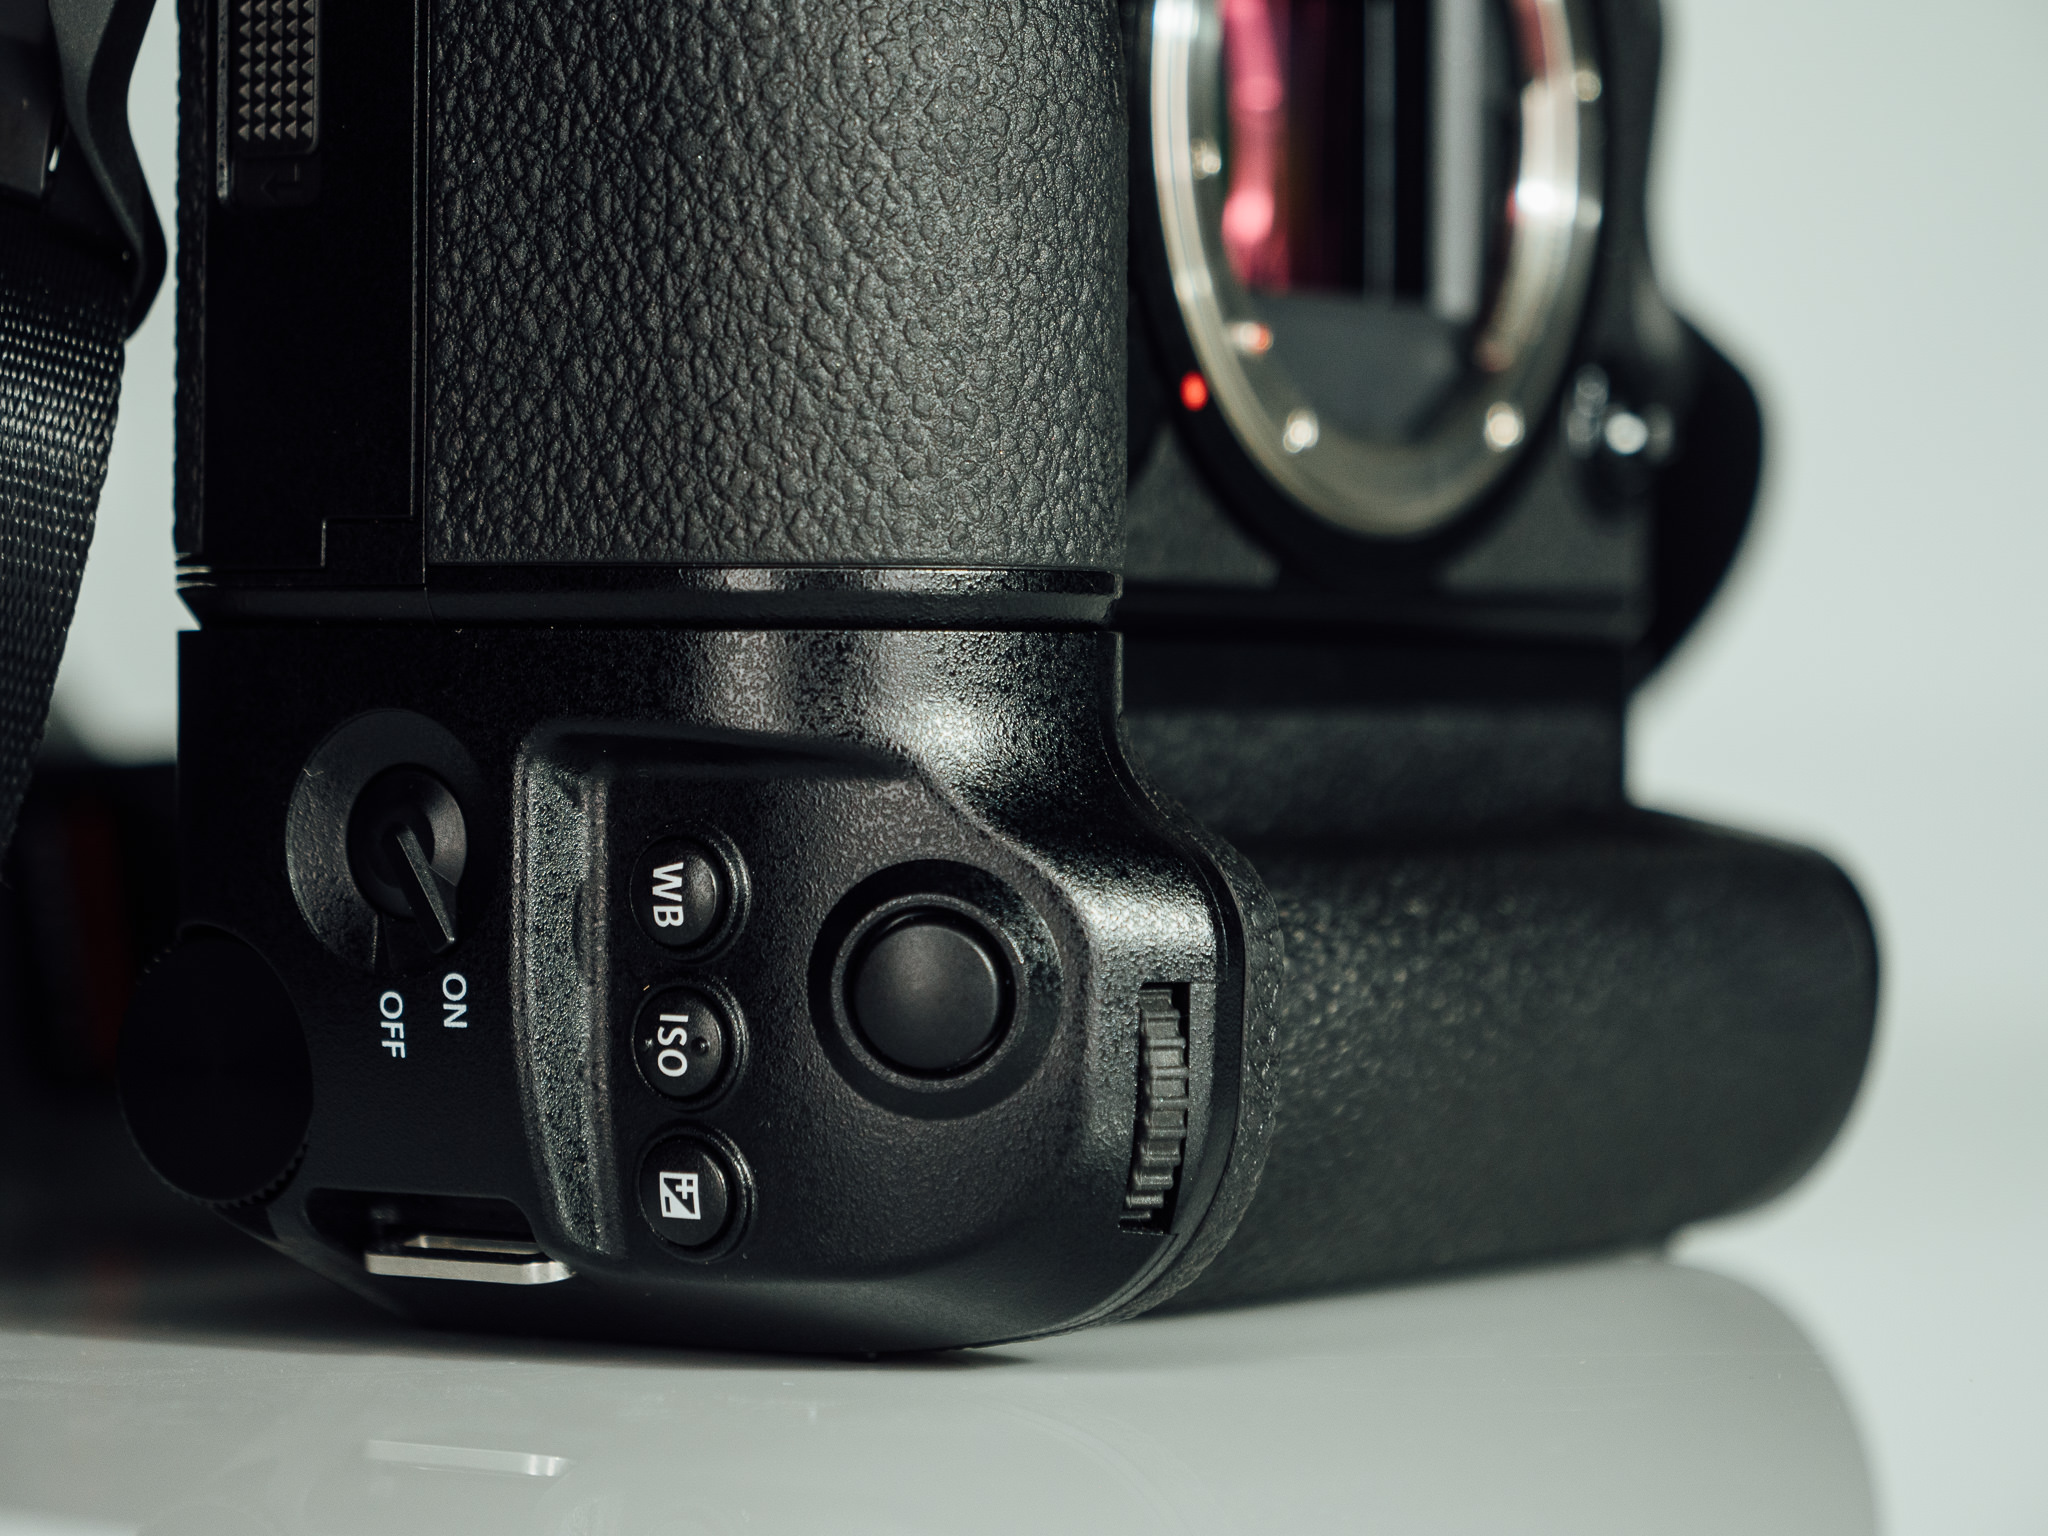 Panasonic BGS1 battery grip for the LUMIX S1 and S1R